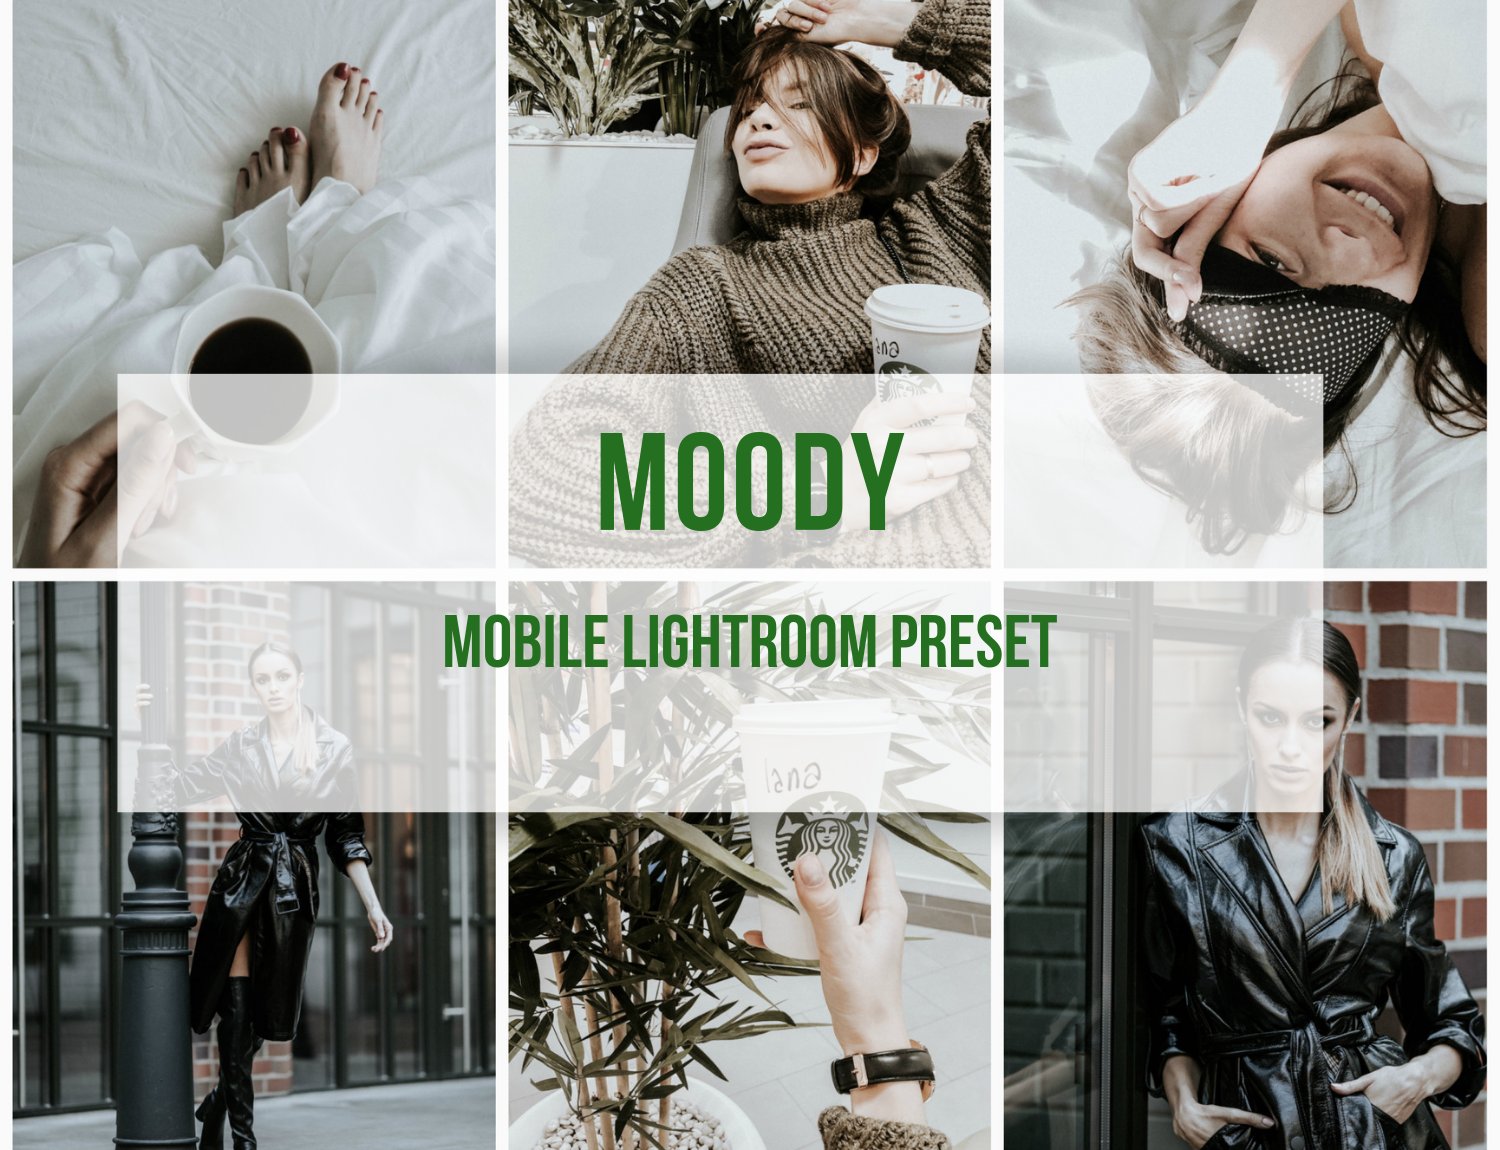 Lightroom Mobile Preset Moodycover image.